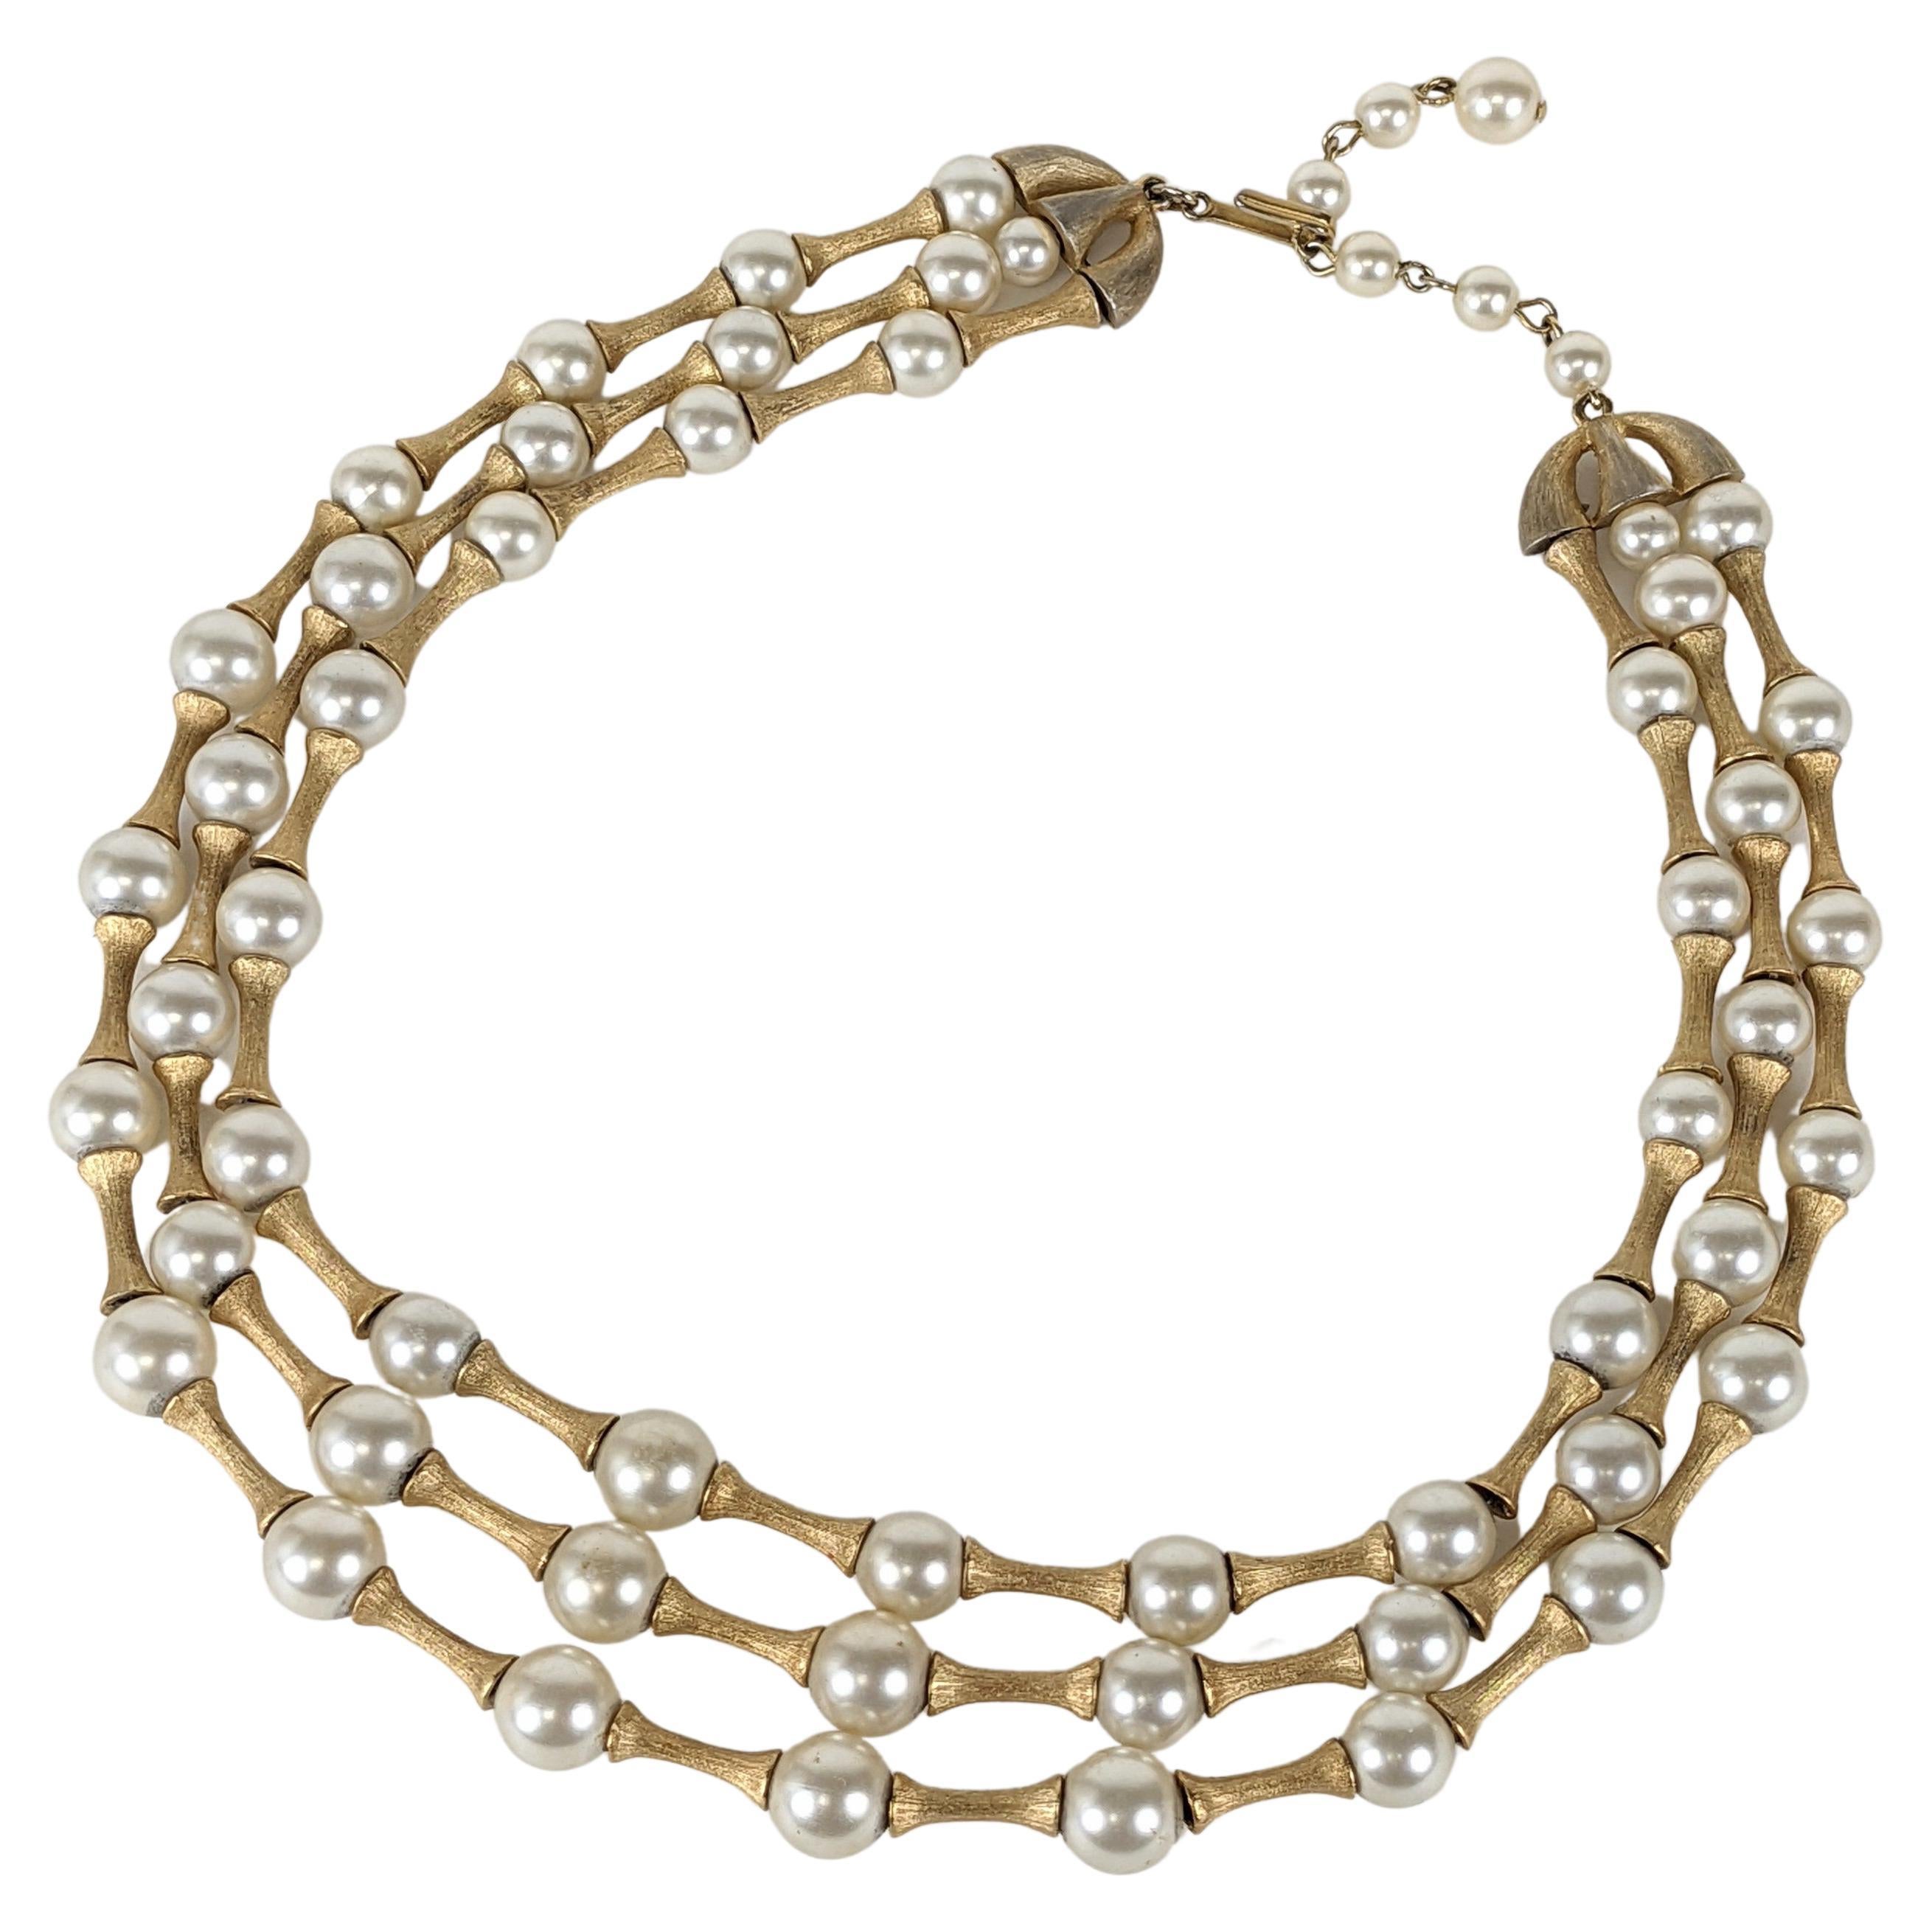 Trifari Modernist Pearl and Gilt Spacer Necklace